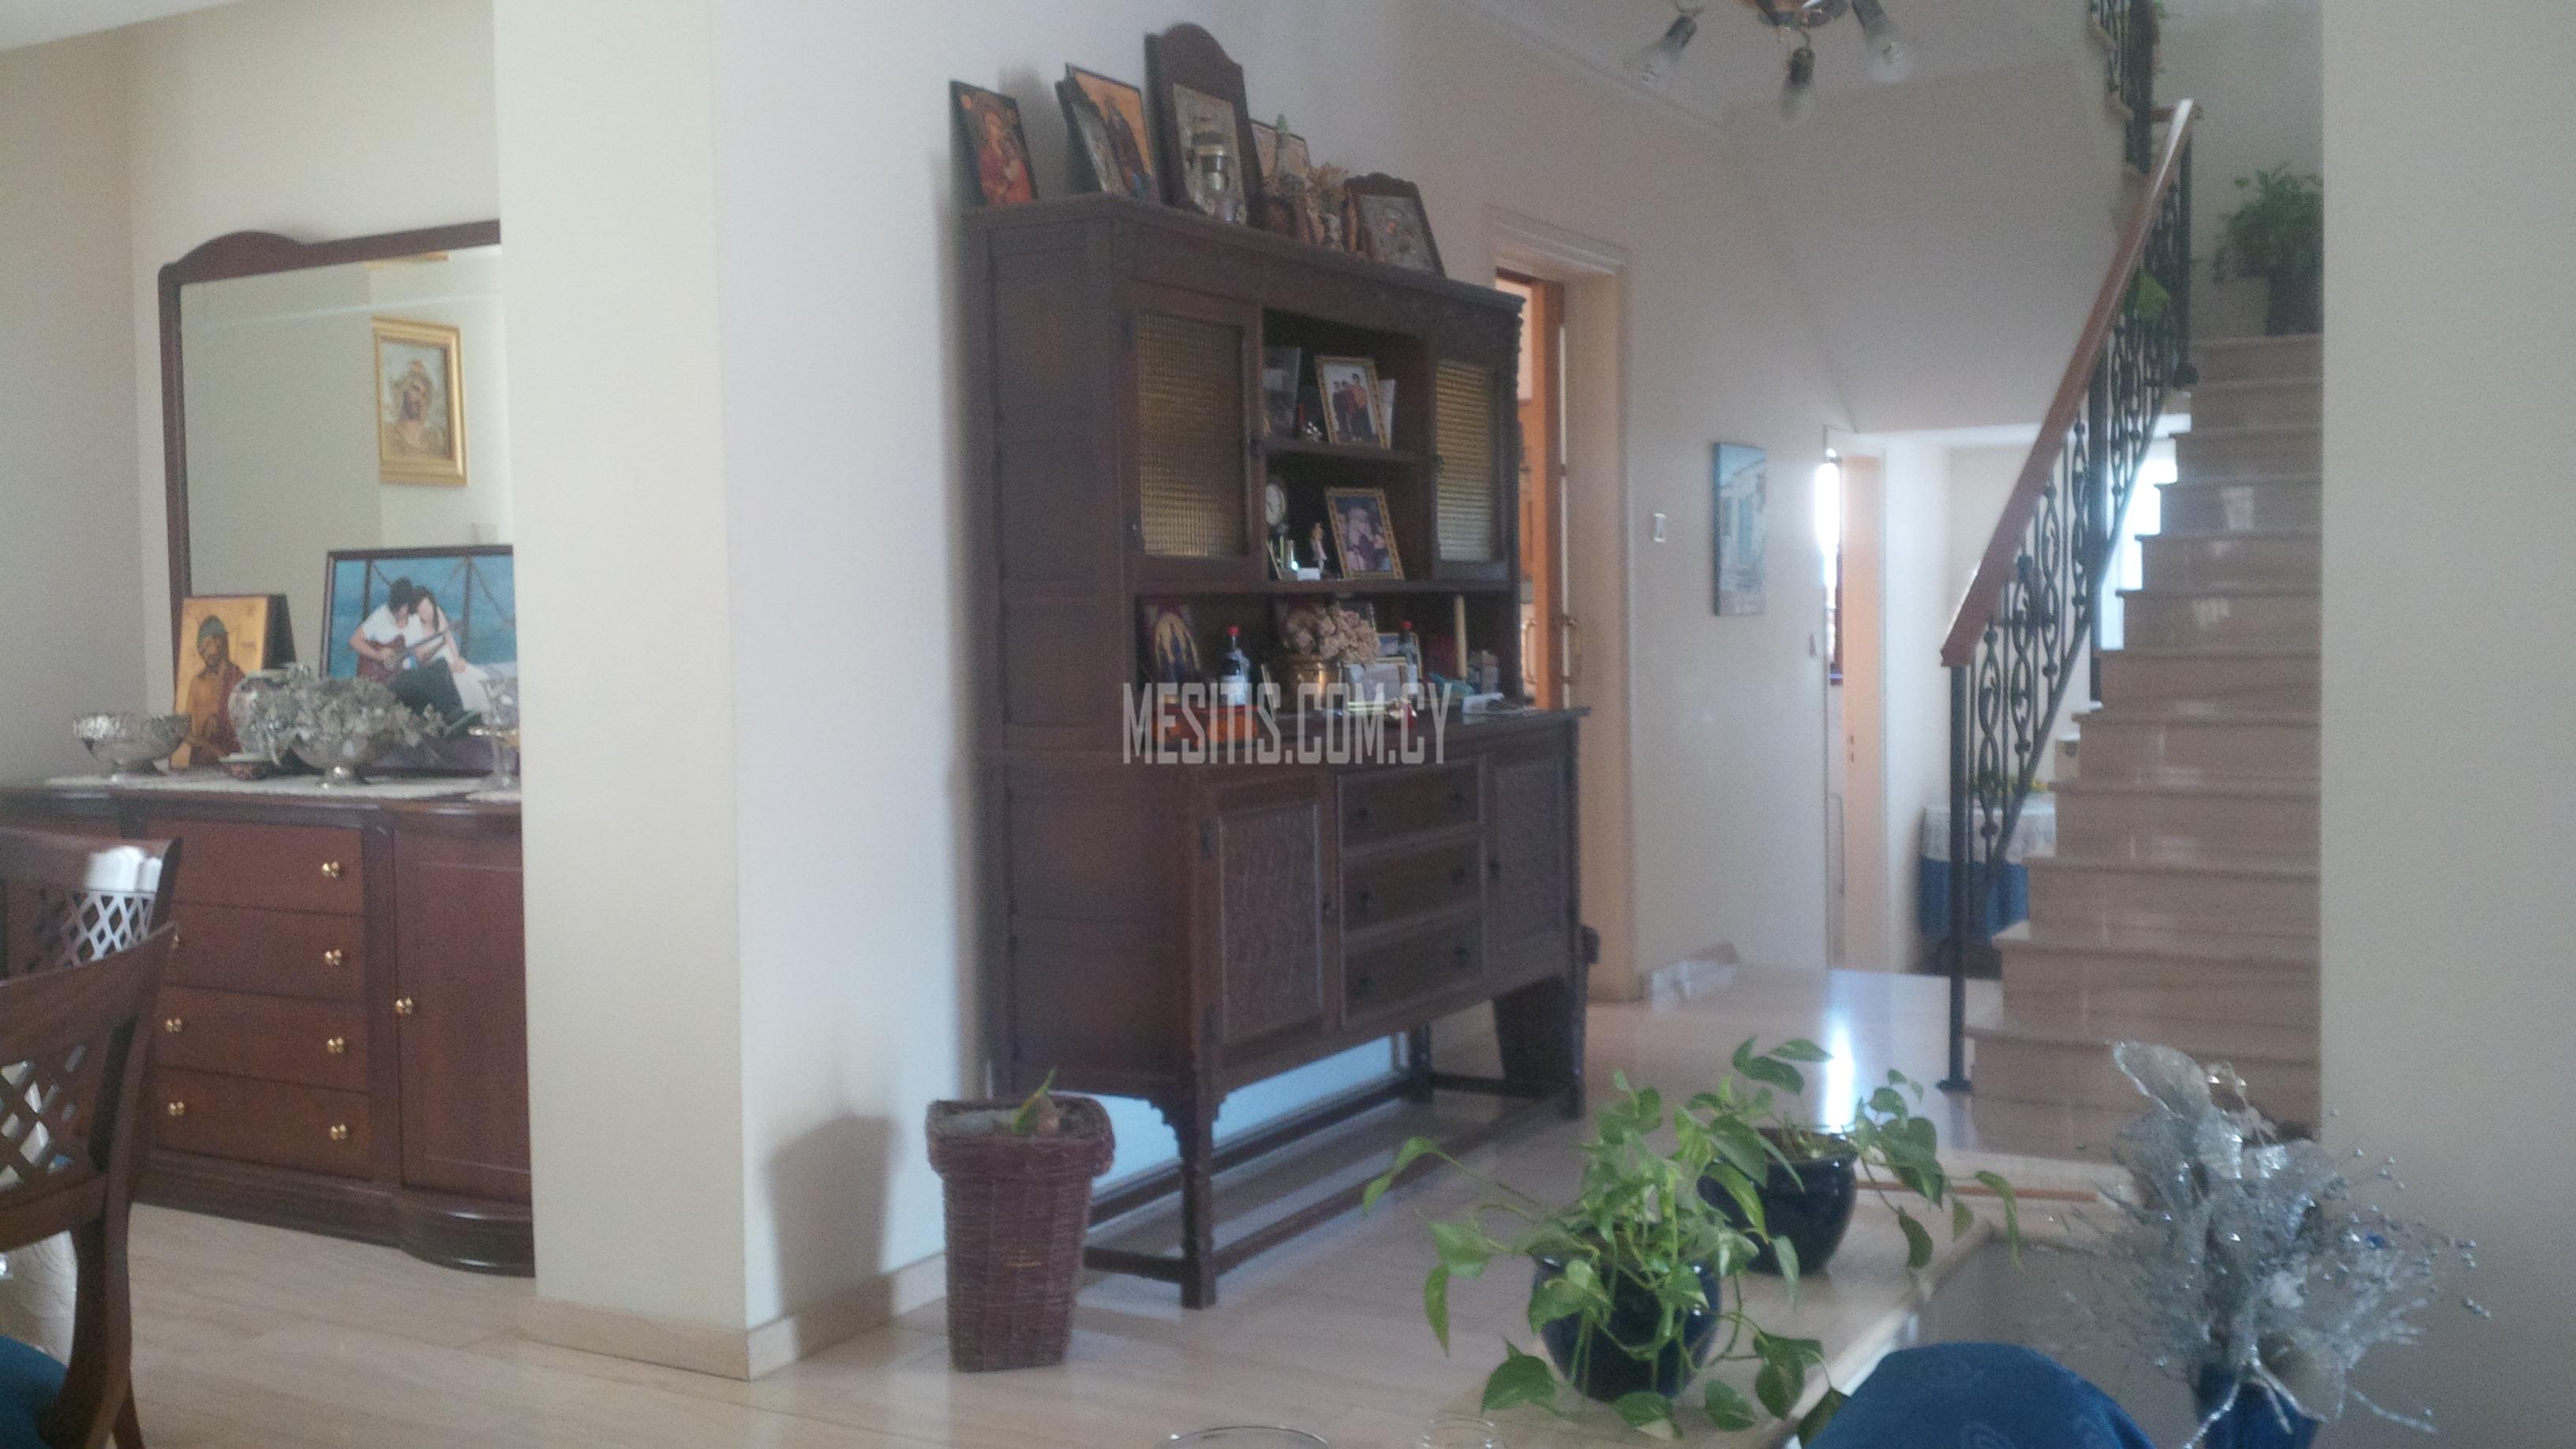 4 Bedroom Luxury House For Rent Or For Sale In Aglantzia With Attic Separate Office Room And Big Yard #1378-4